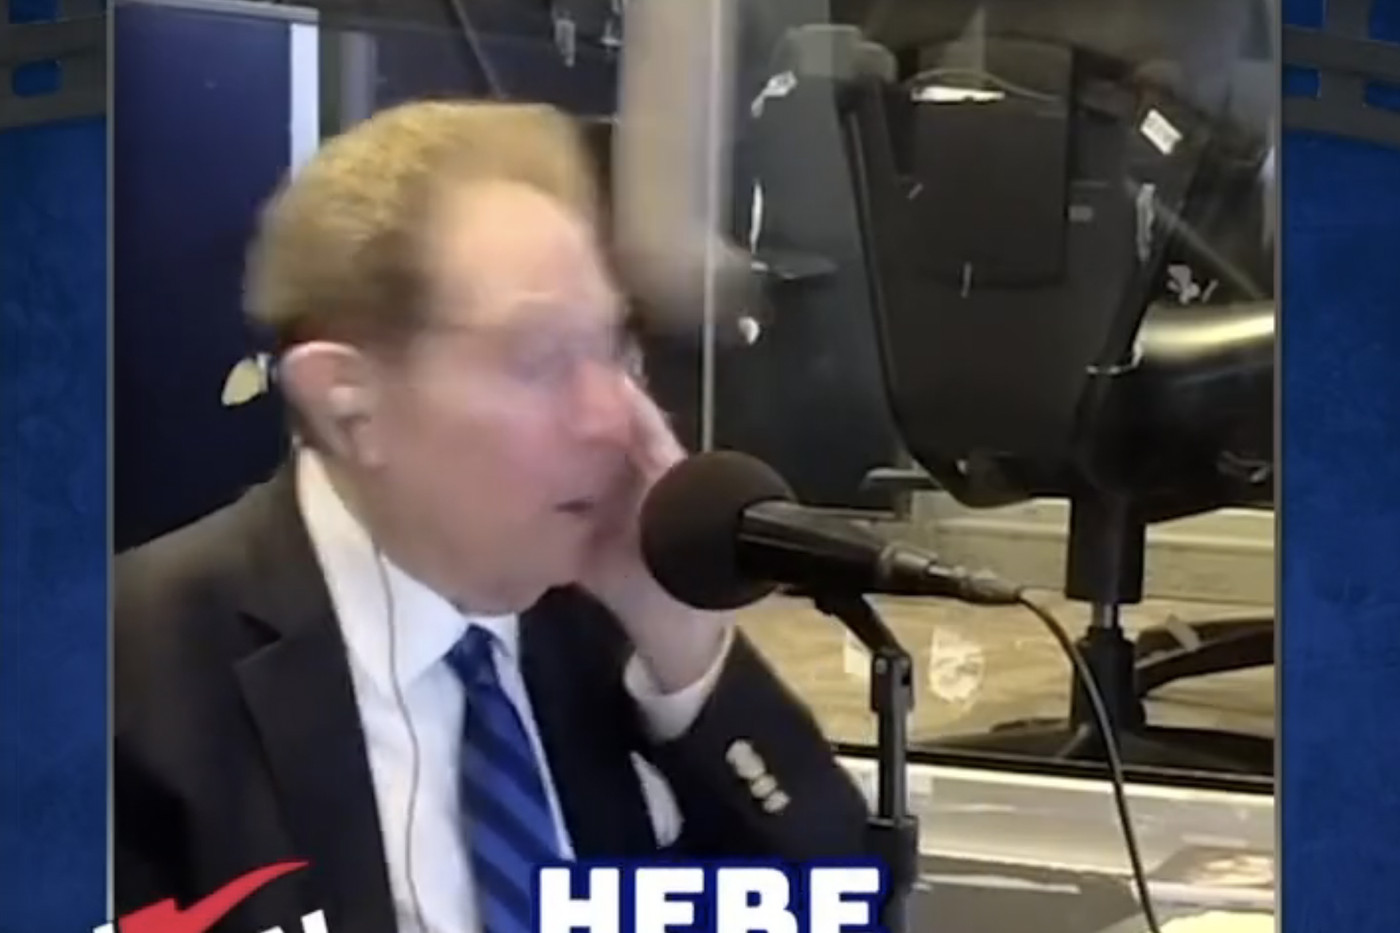 The 84-year-old Yankees broadcaster was drilled in the face by a foul ball, but he didn’t miss a beat